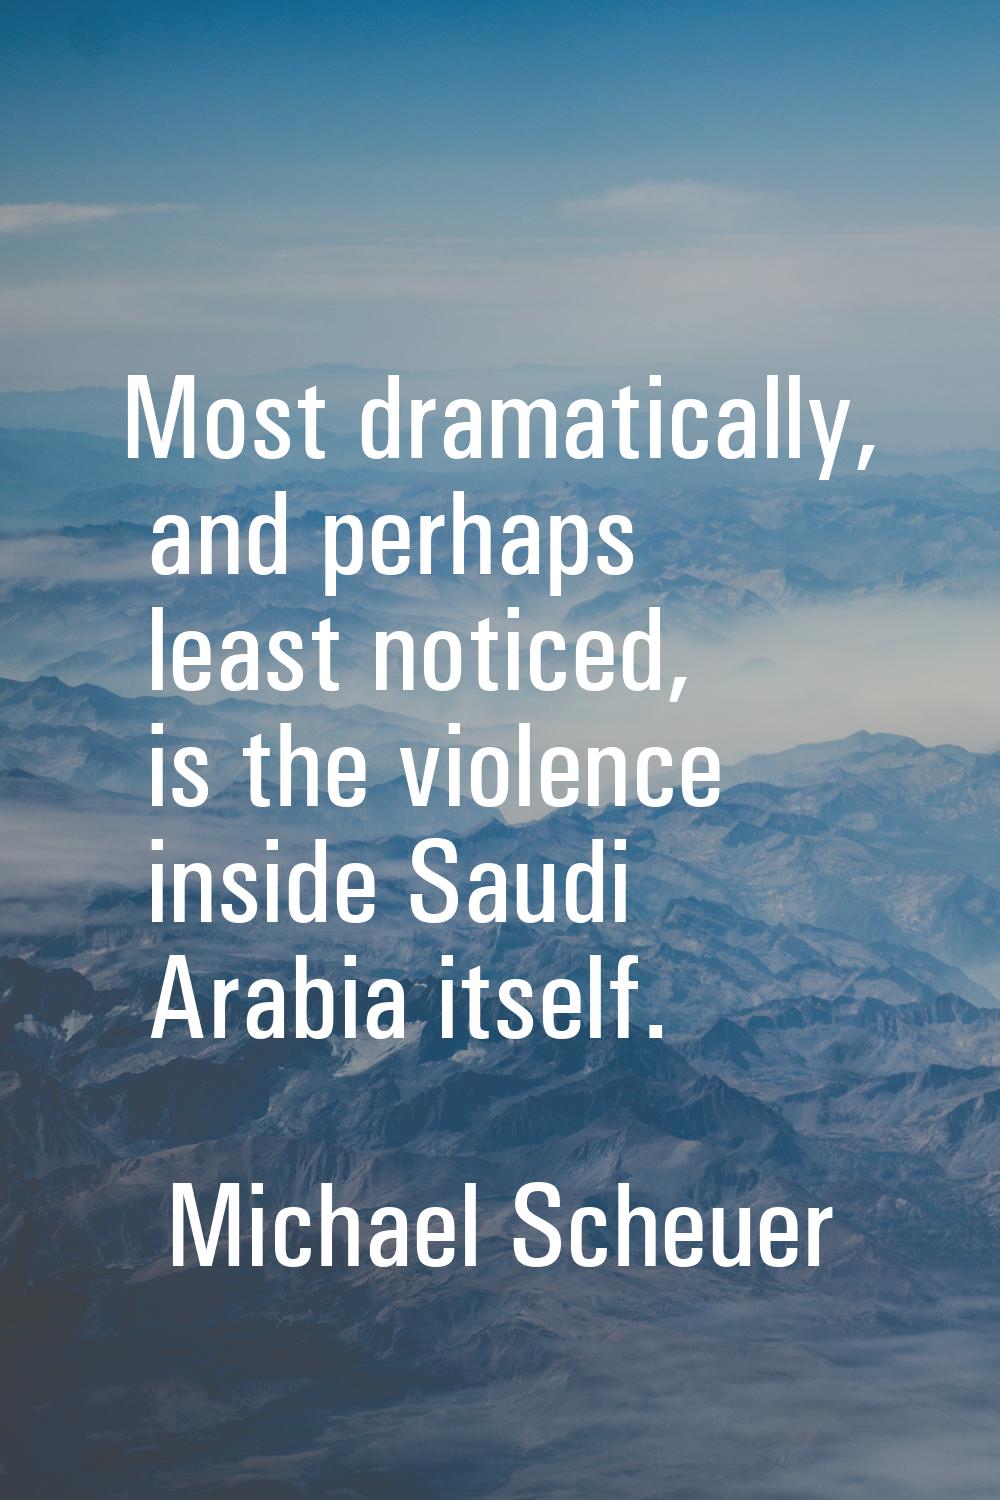 Most dramatically, and perhaps least noticed, is the violence inside Saudi Arabia itself.